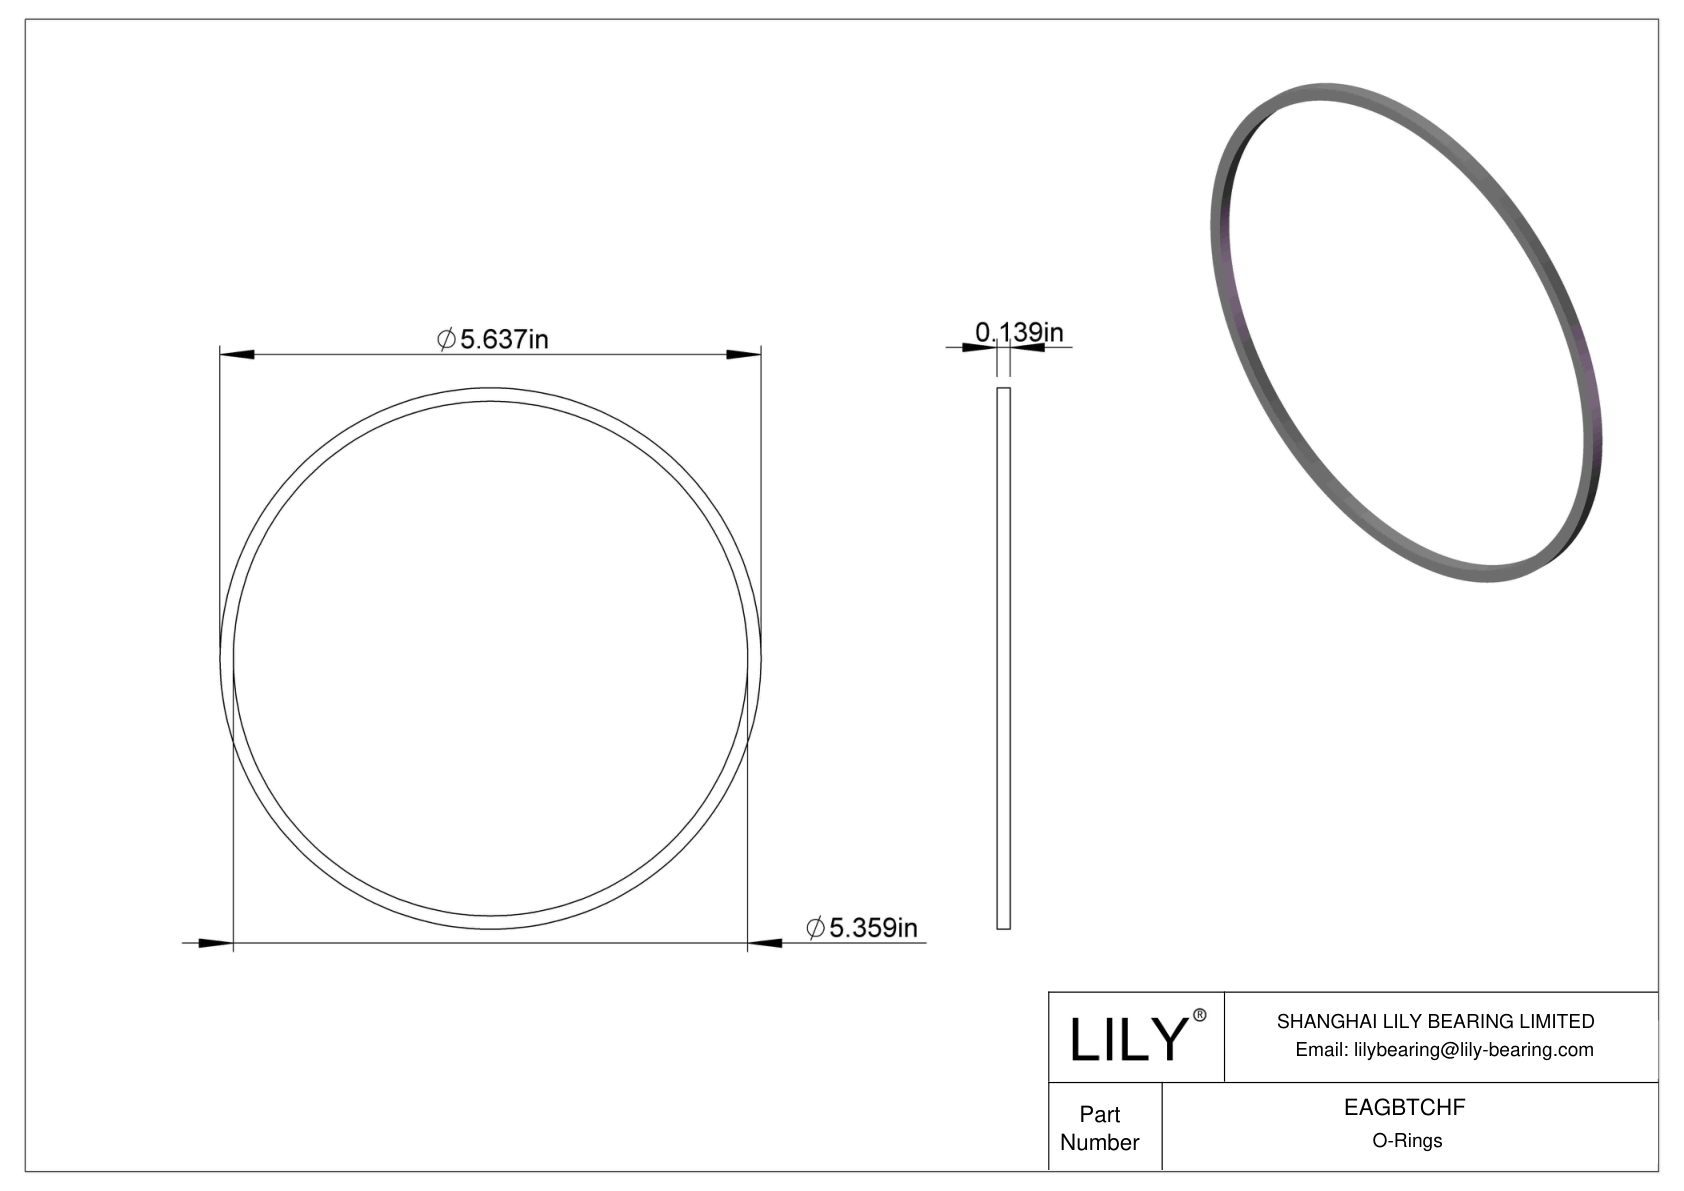 EAGBTCHF Oil Resistant O-Rings Square cad drawing